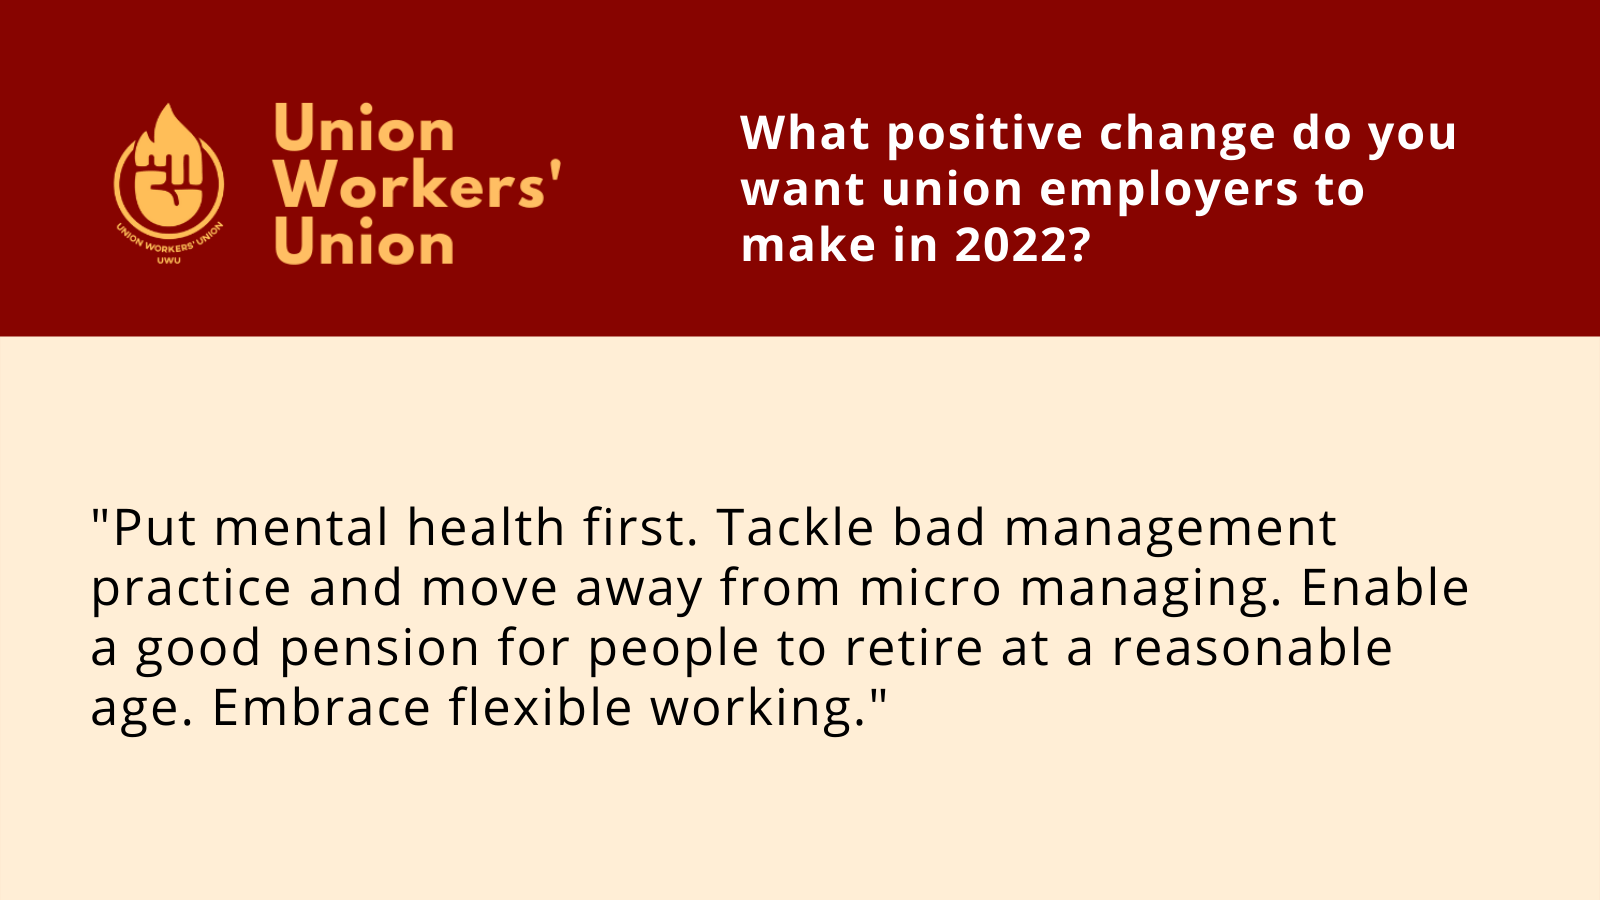 UWU logo next to the question, what positive changes do you want union employers to make in 2022? Member response: Put mental health first. Tackle bad management practice and move away from micro managing. Enable a good pension for people to retire at a reasonable age. Embrace flexible working.